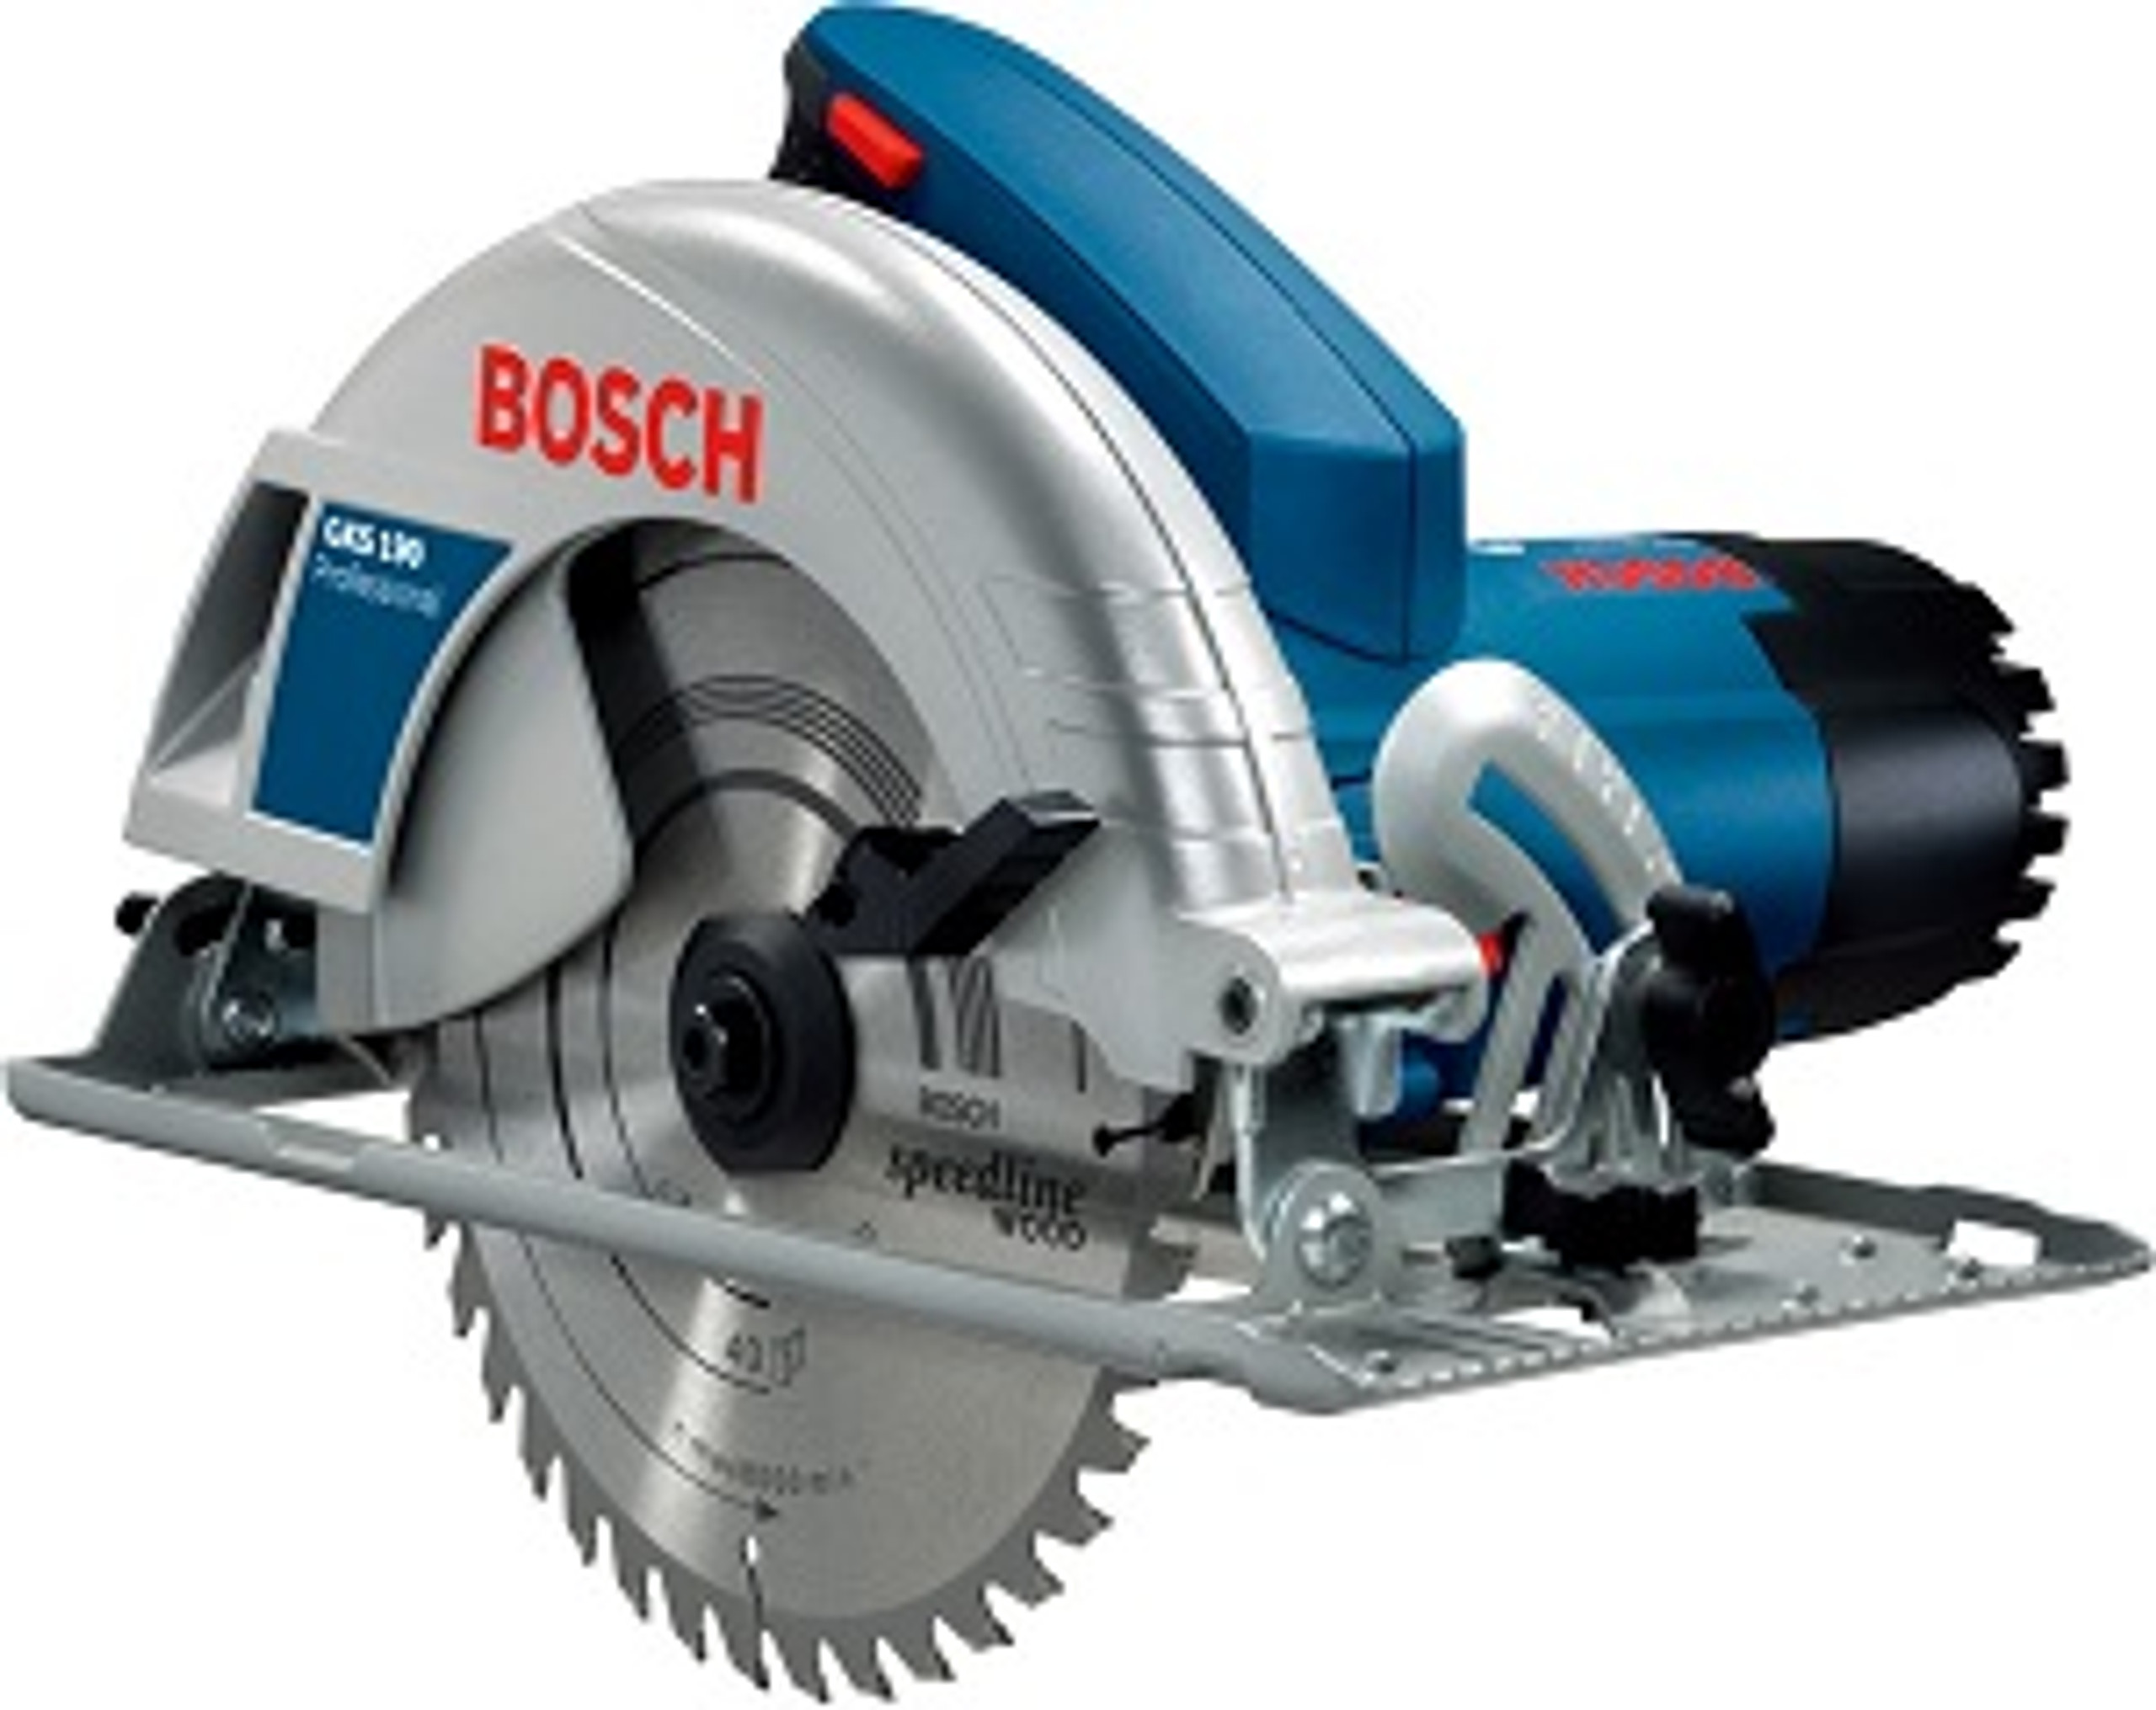 Buy Bosch GKS 235 Turbo Professional Circular Saw from Tikweld Welding .